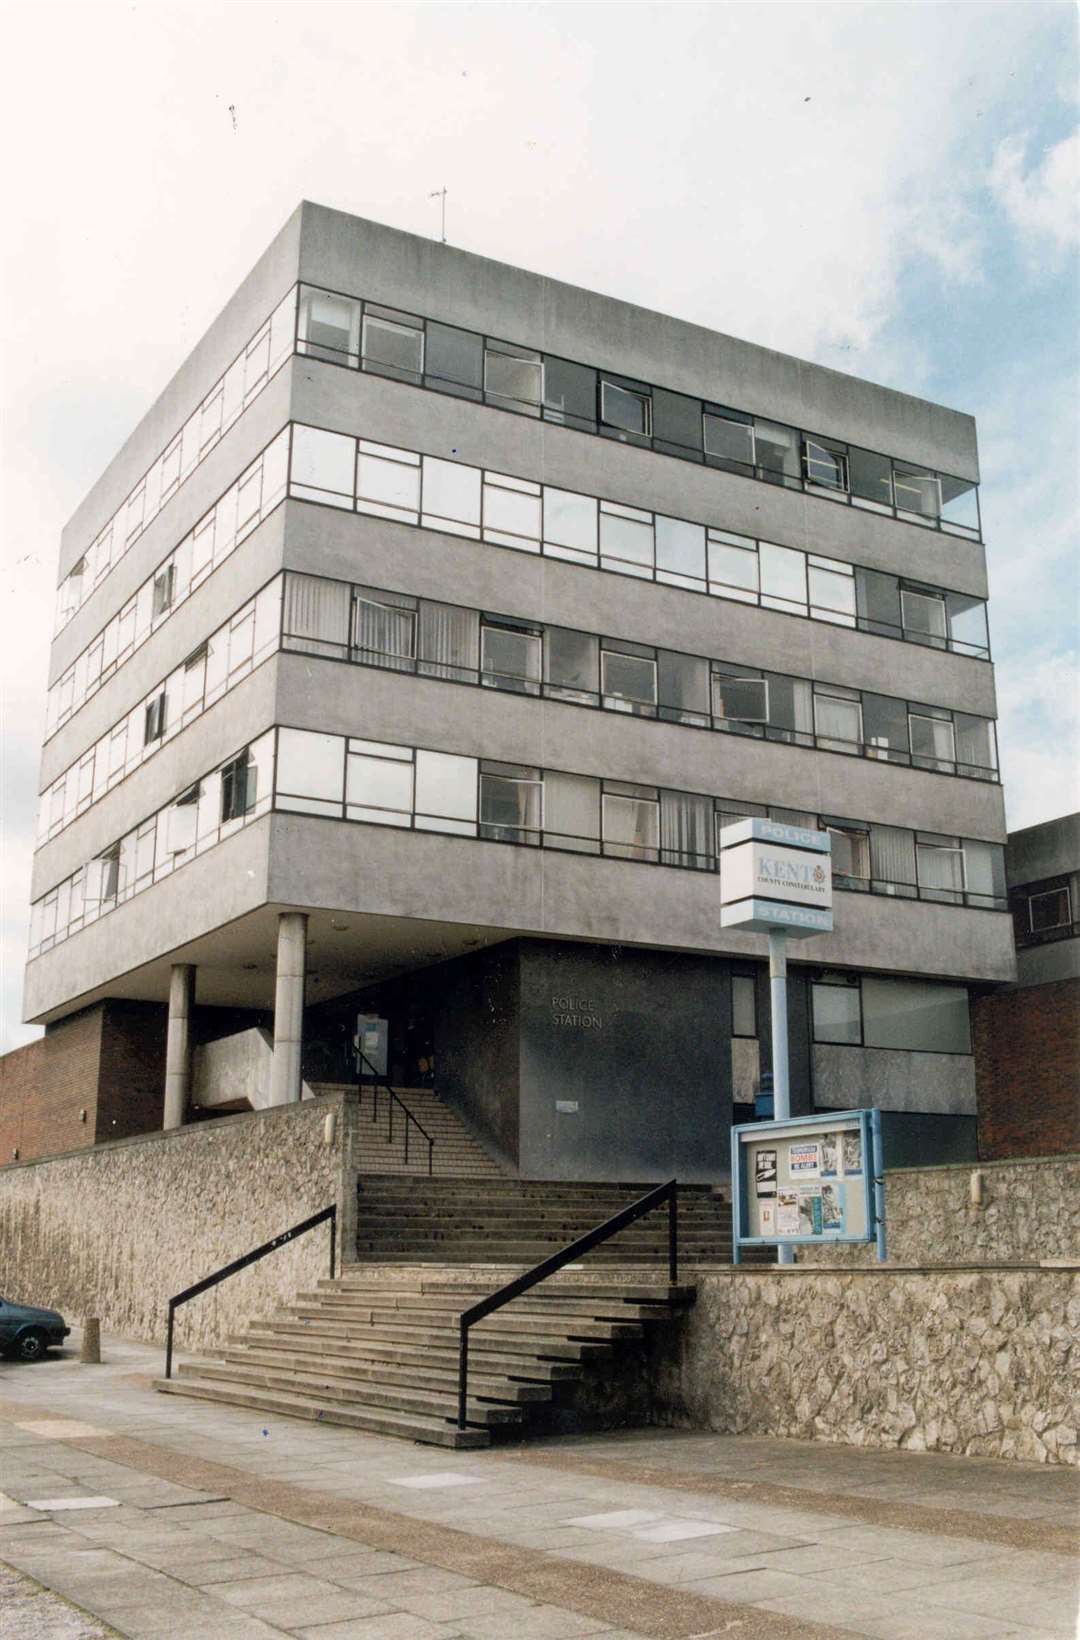 Rochester's police station in 1997